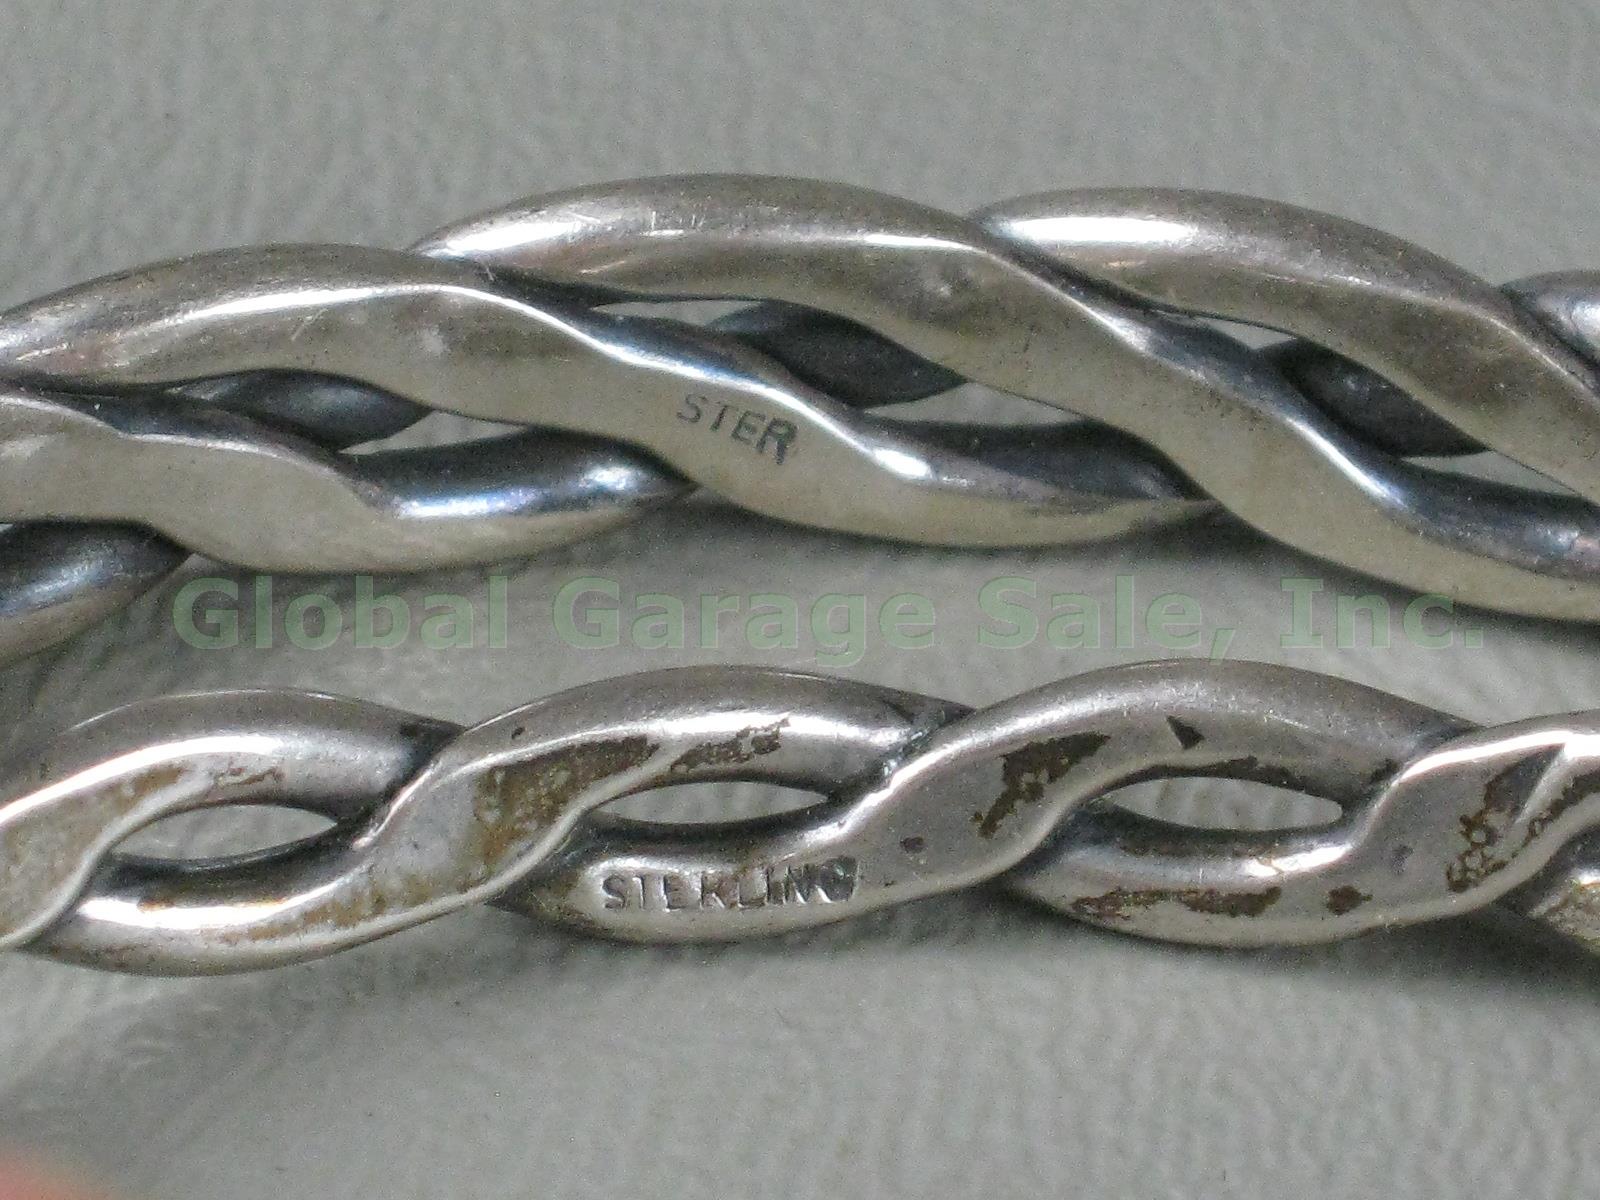 10 Vtg Sterling Silver Bangle Bracelets Lot 4.6 Ounces Braided Woven Rope Floral 5